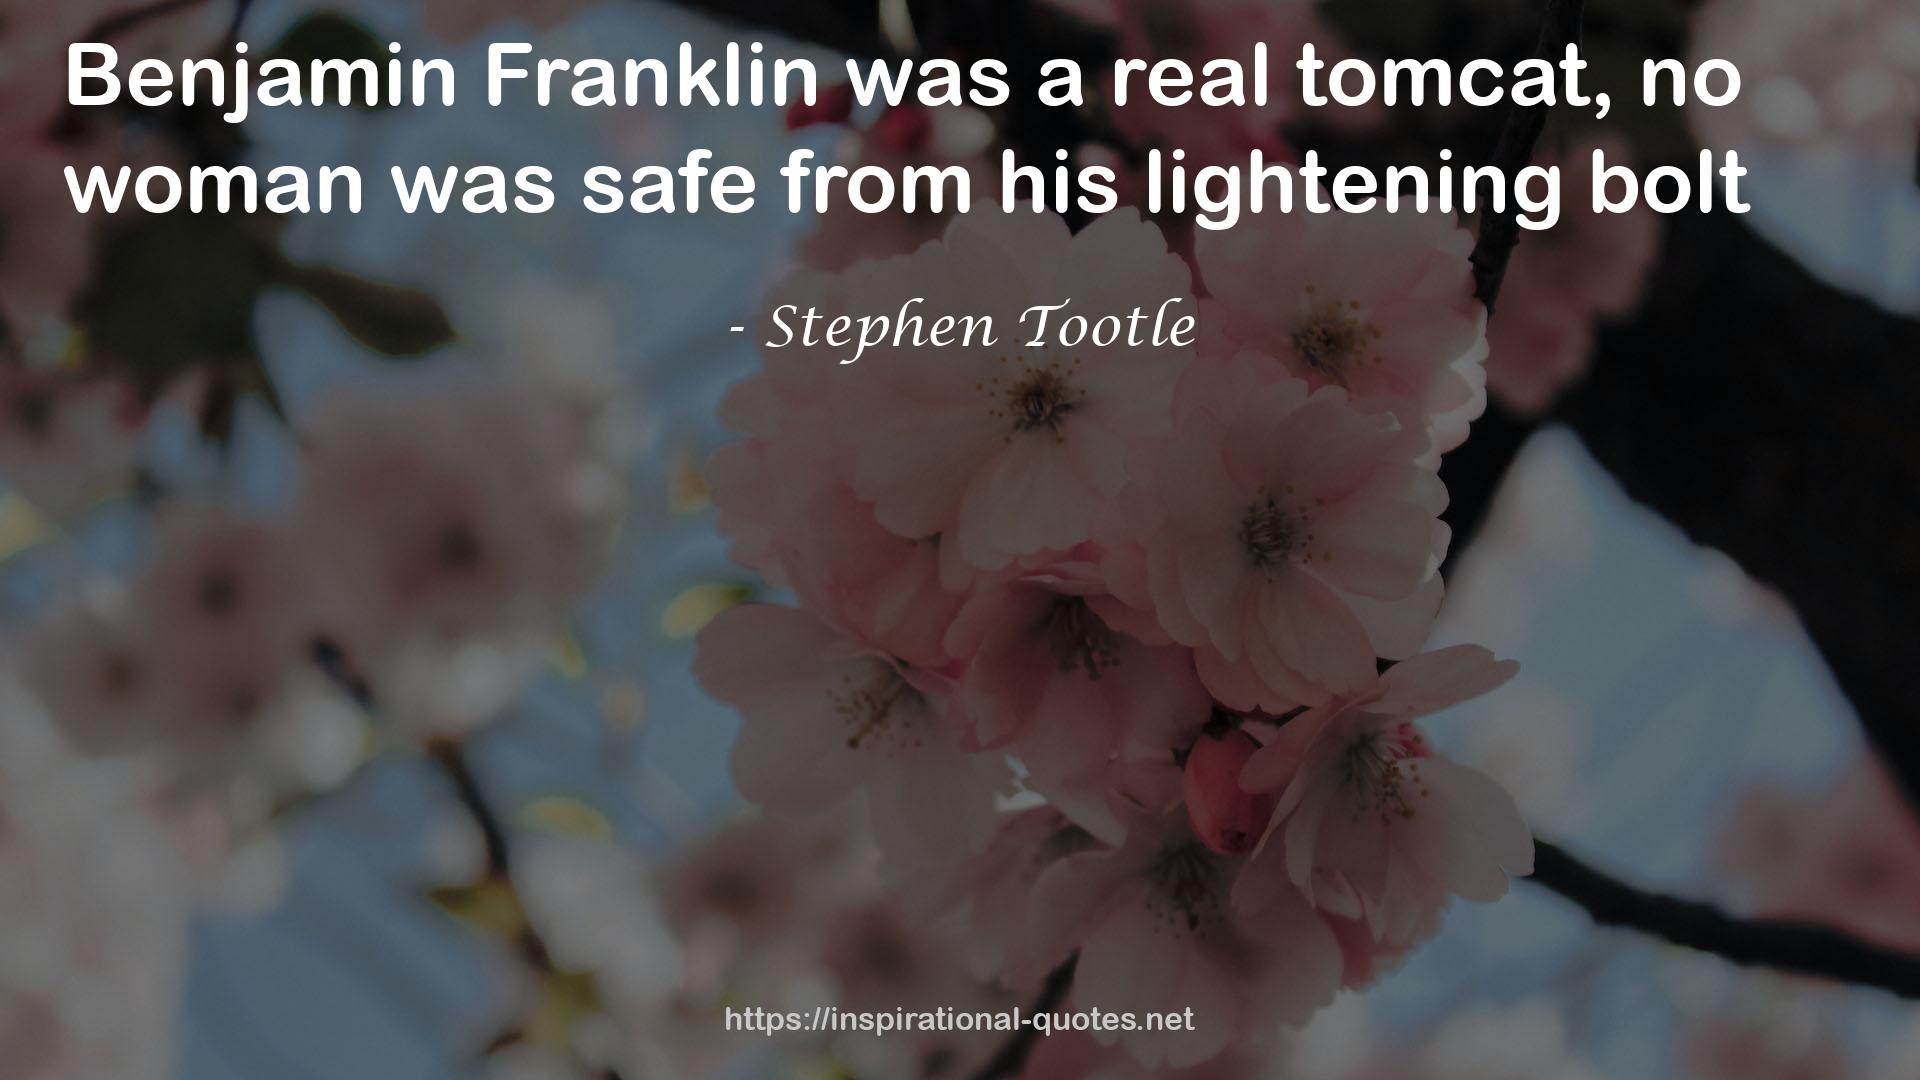 Stephen Tootle QUOTES